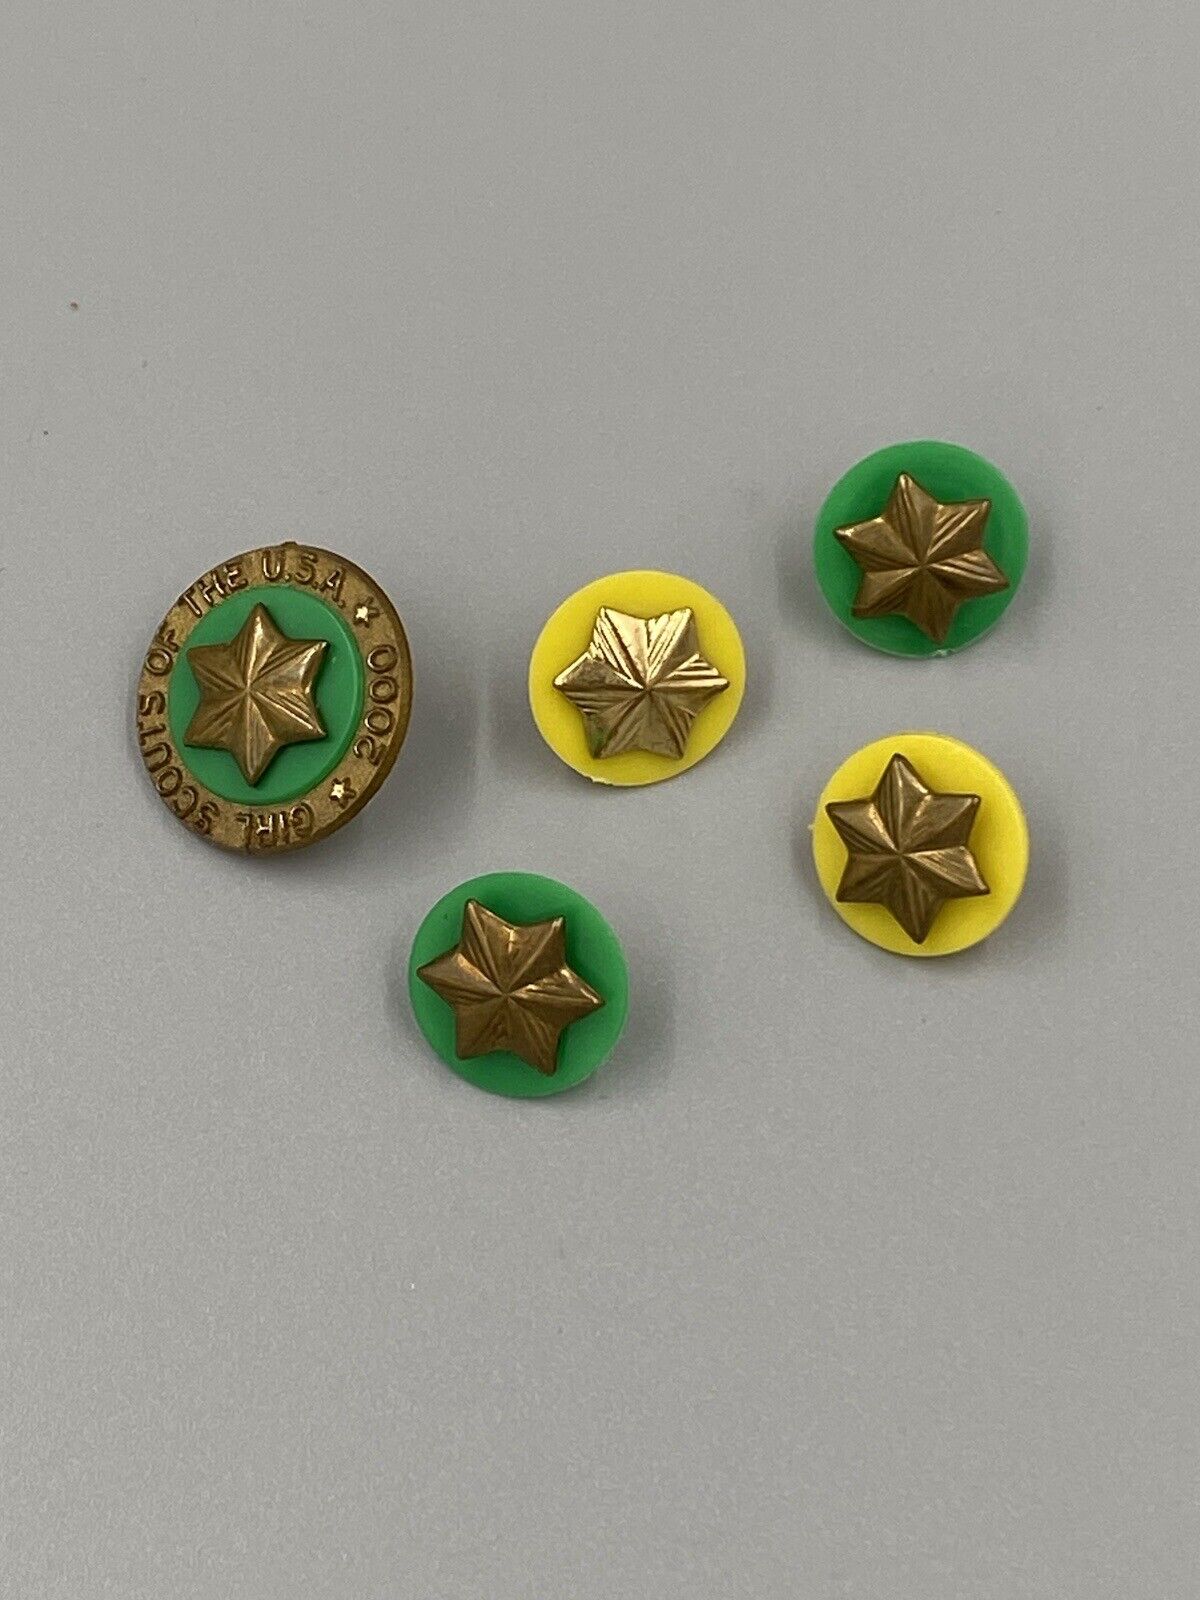 Vintage 2000 - Girl Scouts Of America USA Lapel Pins - Lot Of 5